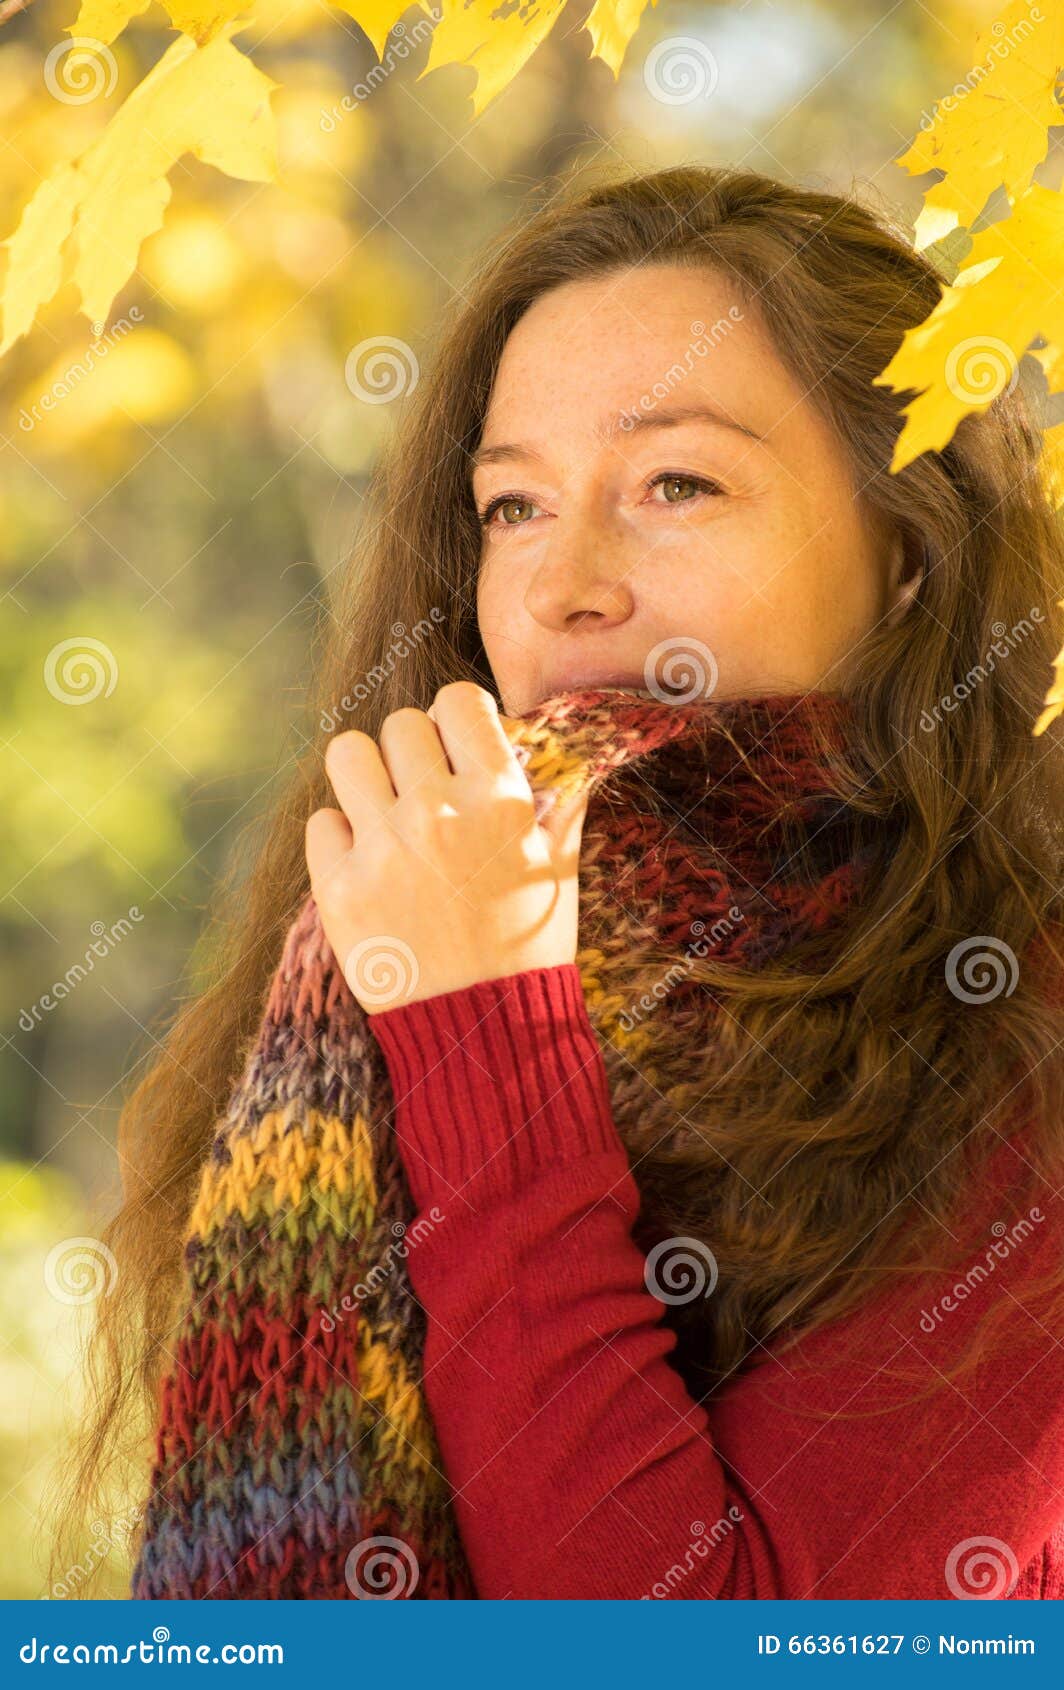 Woman with Brown Hair at Autumn Forest Stock Image - Image of leaf ...